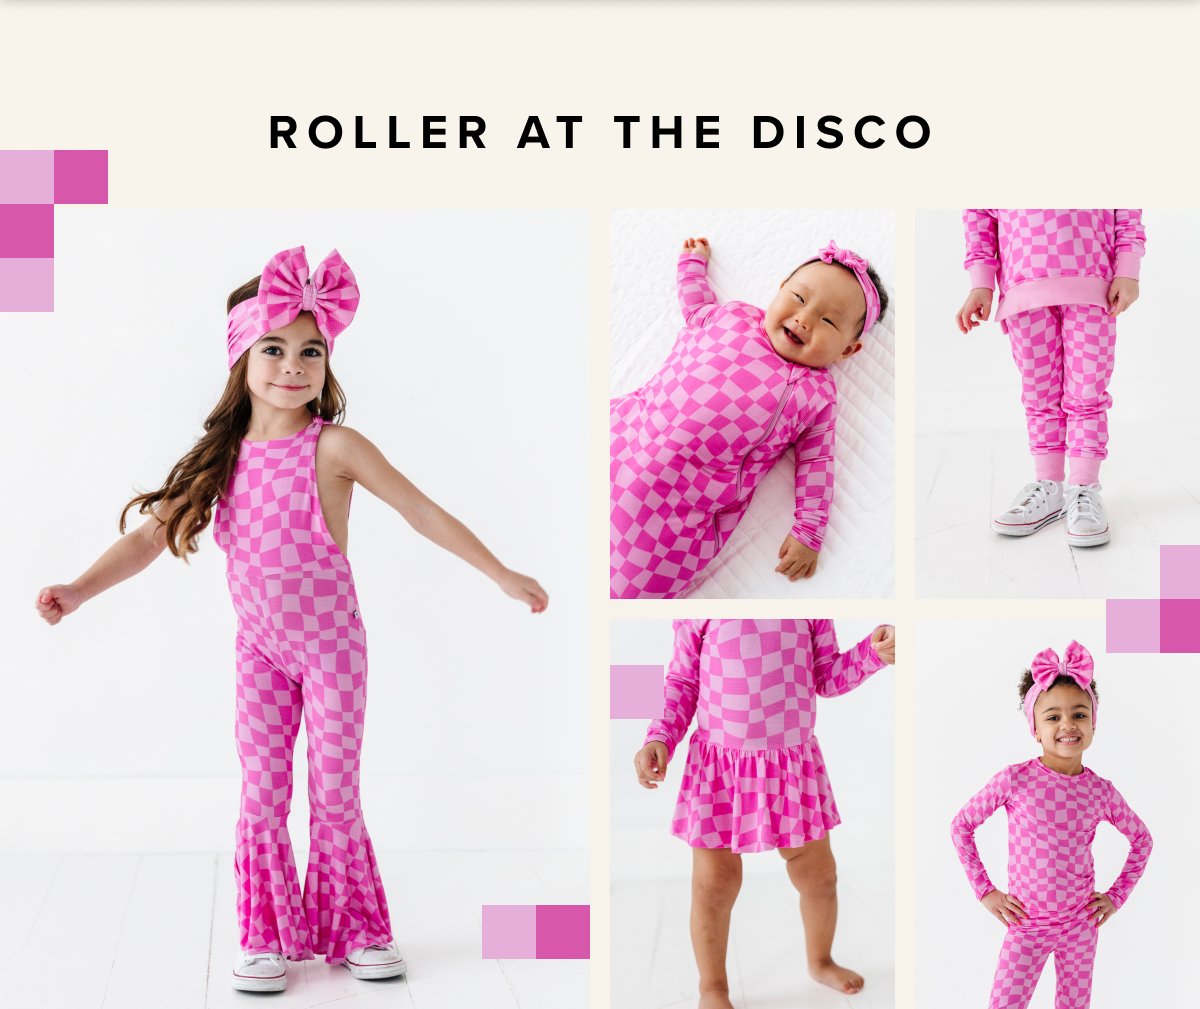 ROLLER AT THE DISCO